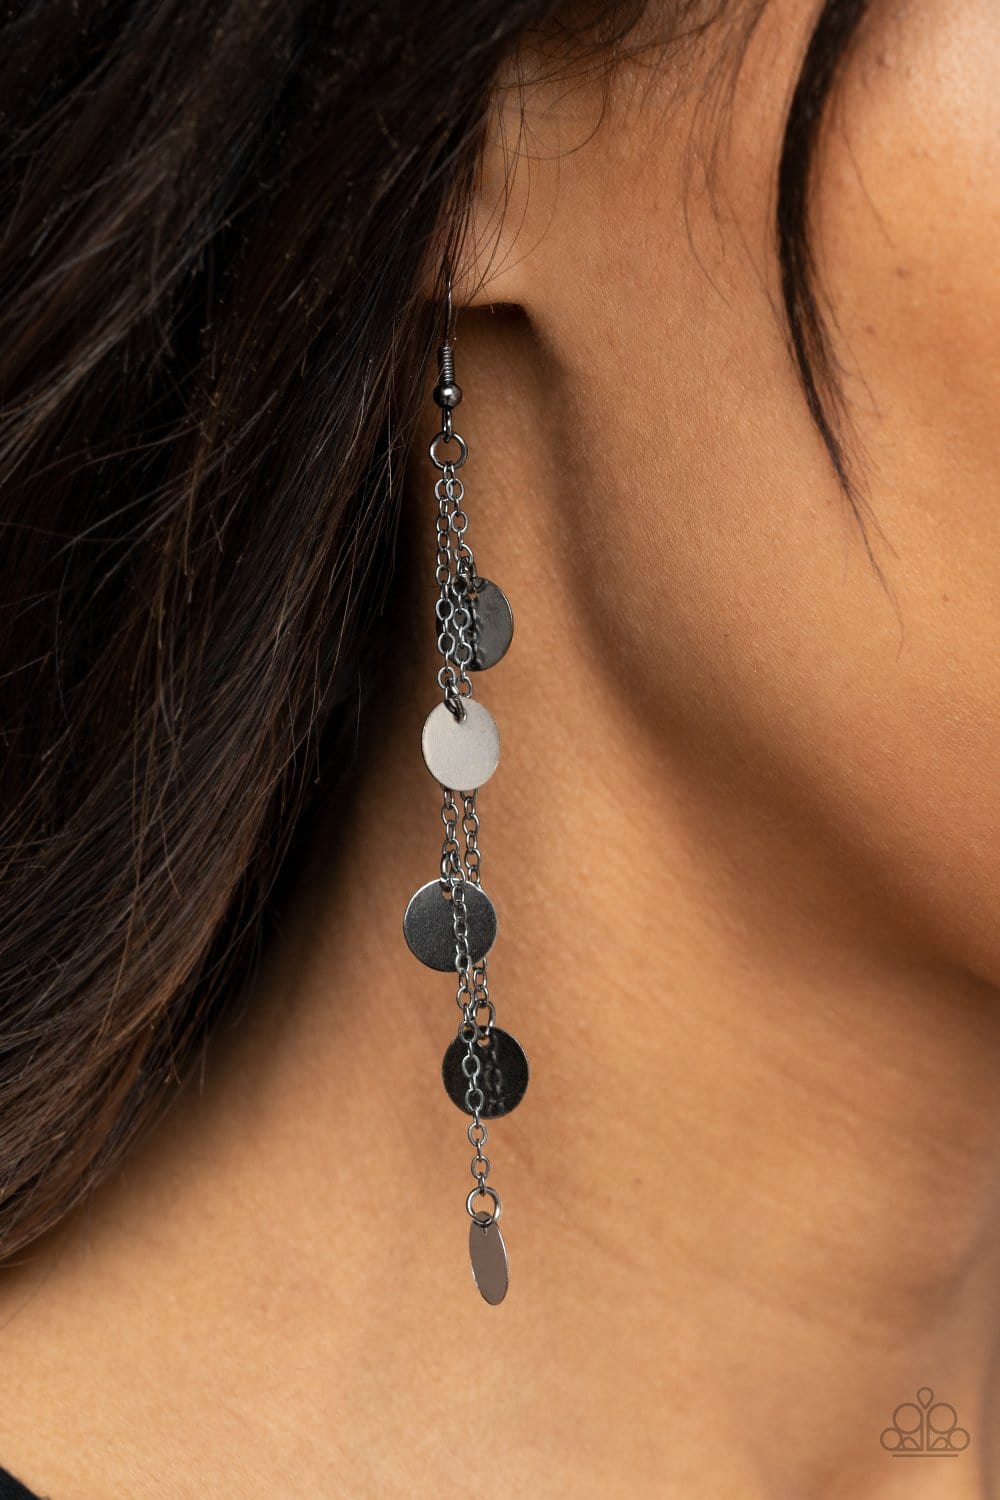 Paparazzi Accessories: Take A Good Look - Black Earrings - Jewels N Thingz Boutique